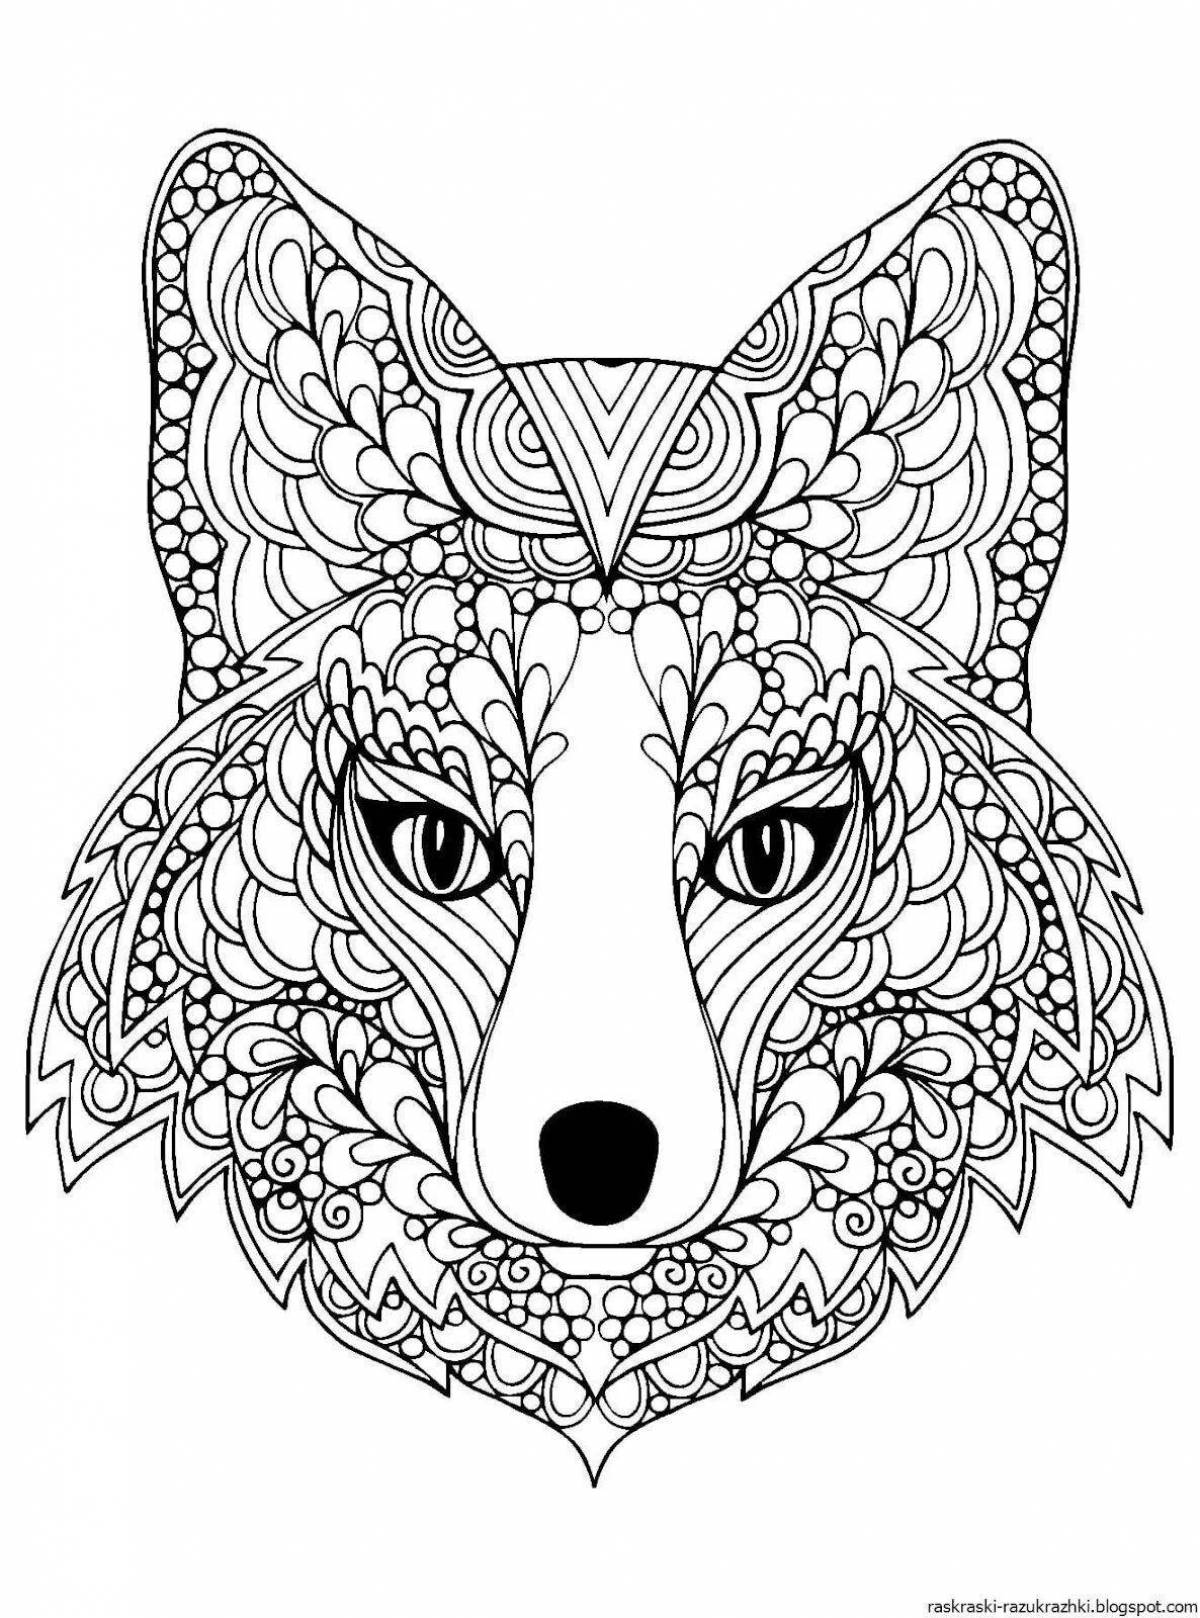 Coloring book playful anti-stress animal complex